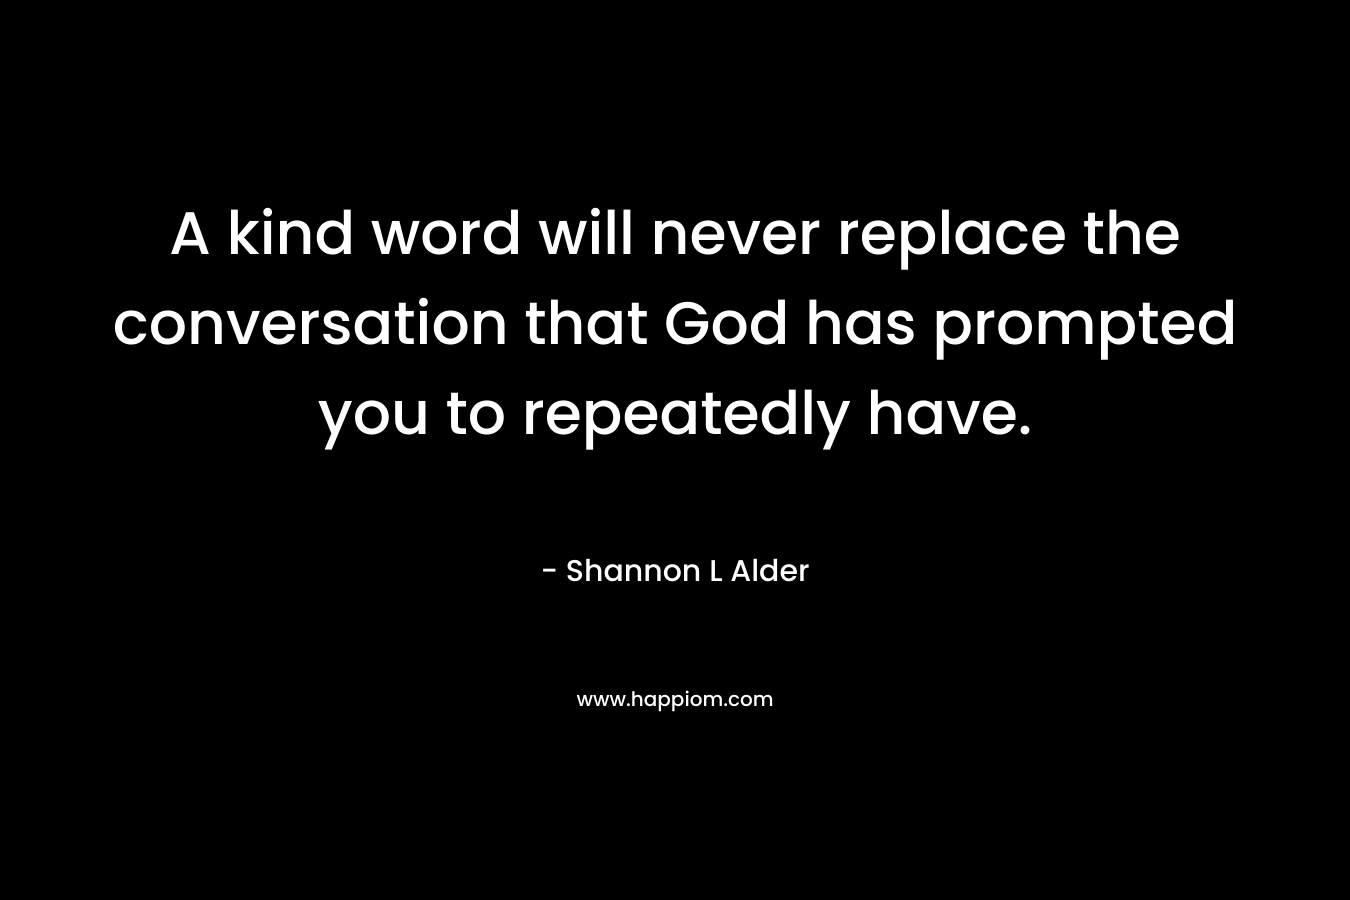 A kind word will never replace the conversation that God has prompted you to repeatedly have. – Shannon L Alder